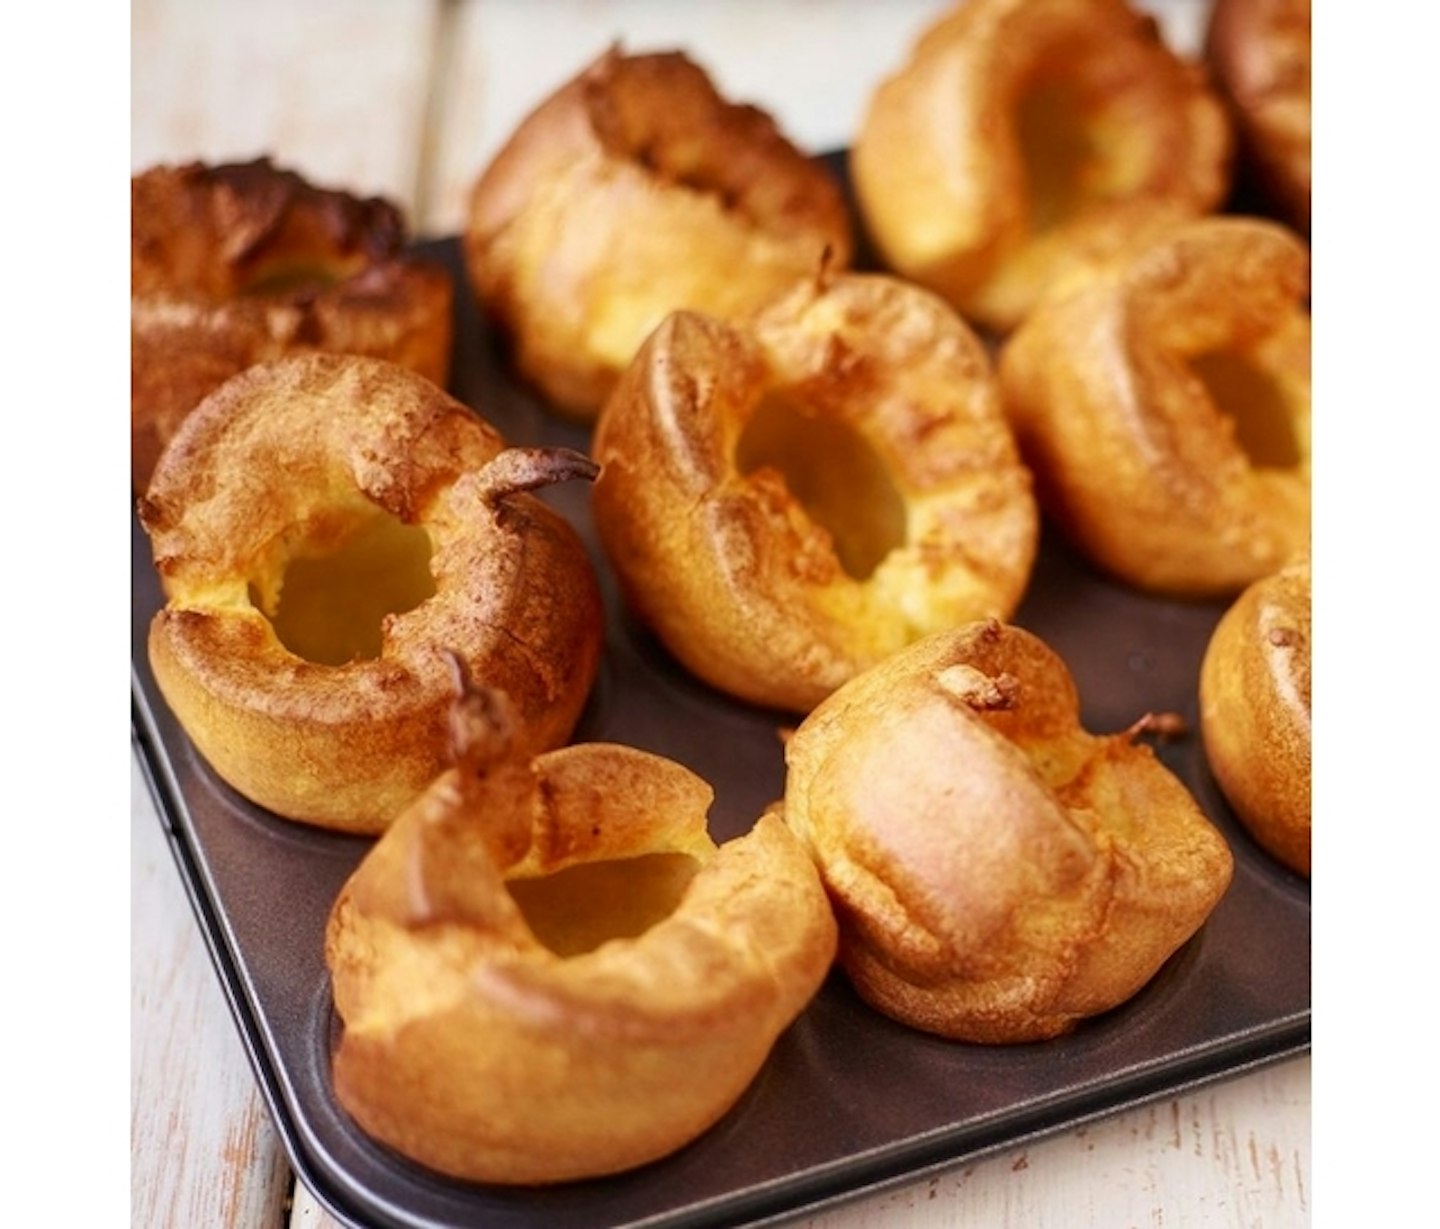 Jamie Oliver Yorkshire puddings